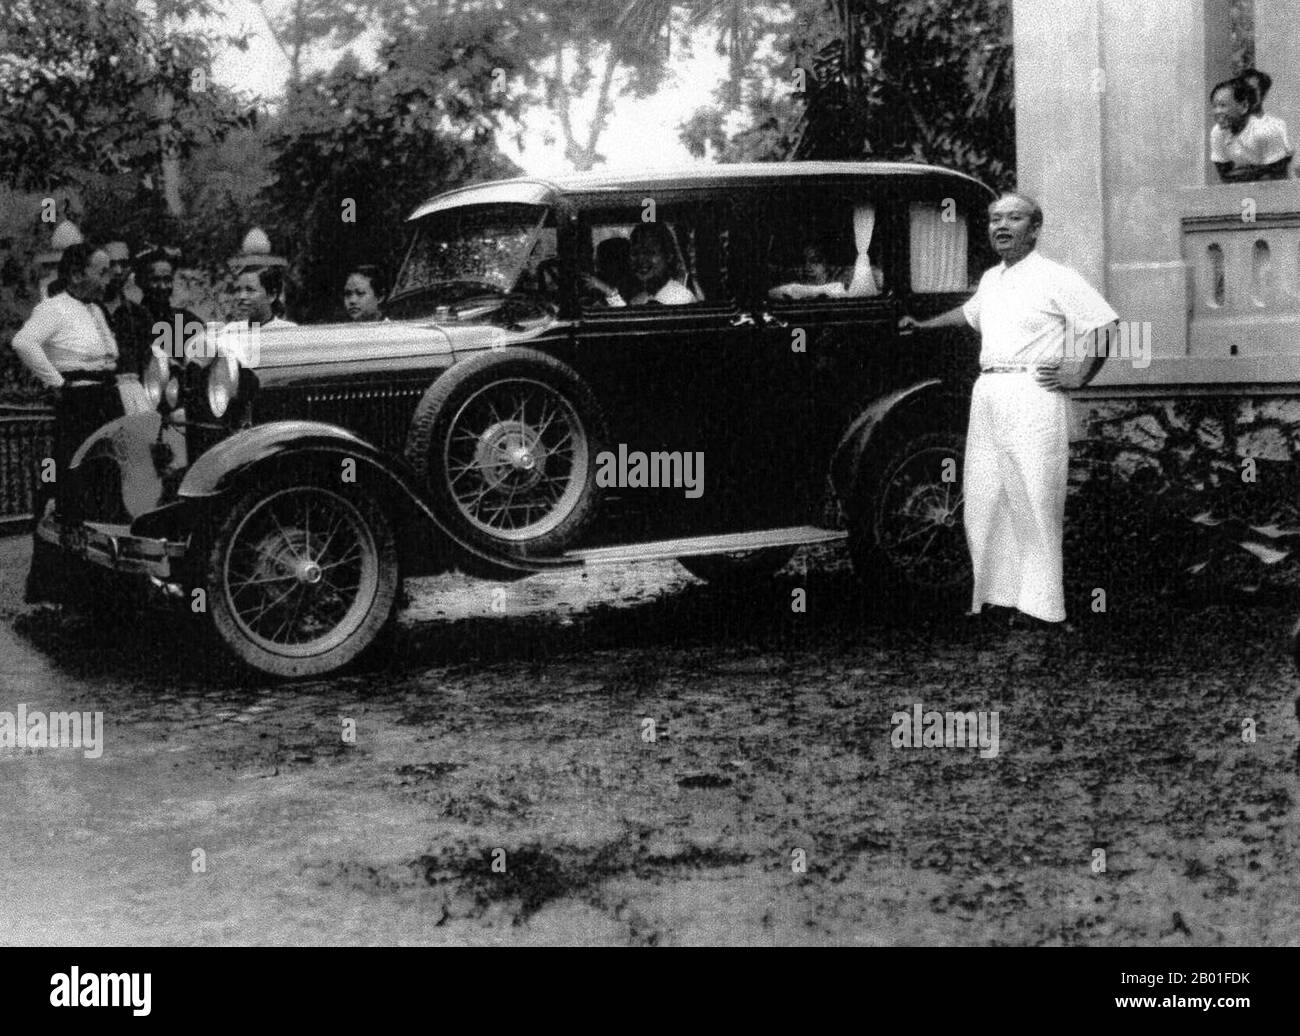 Vietnam: Deo Van Long (15 March 1887 - 20 November 1975), Lord of the Tai Federation of Sipsongchuthai, with his car, c. 1940s.  Đèo Văn Long was the White Tai leader of the Sip Song Chau Tai confederation of Northwestern Tonkin in French Indochina.  Under his father Deo Van Tri, he was the scion of a hereditary feudal noble line with roots in Yunnan. He generated much revenue for the Federation by acting as a middleman in the opium traffic between the Tai Federation and the French. He compelled the Hmong of the Federation to sell to him at below-market prices, thus making enormous profits. Stock Photo